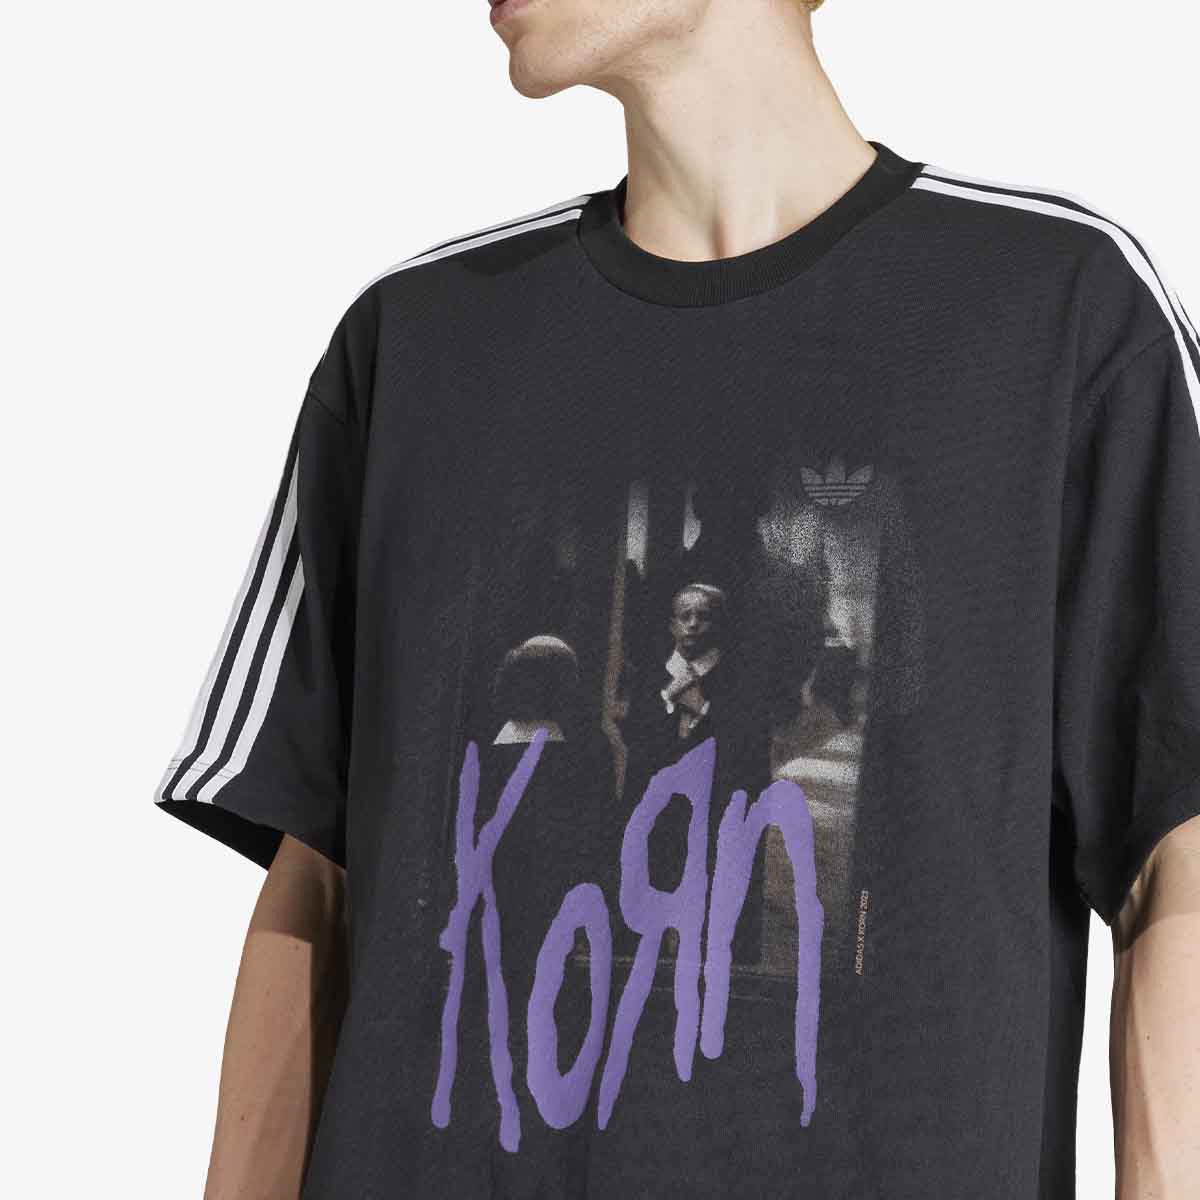 Adidas x KORN Graphic T-Shirt (Carbon) | END. Launches